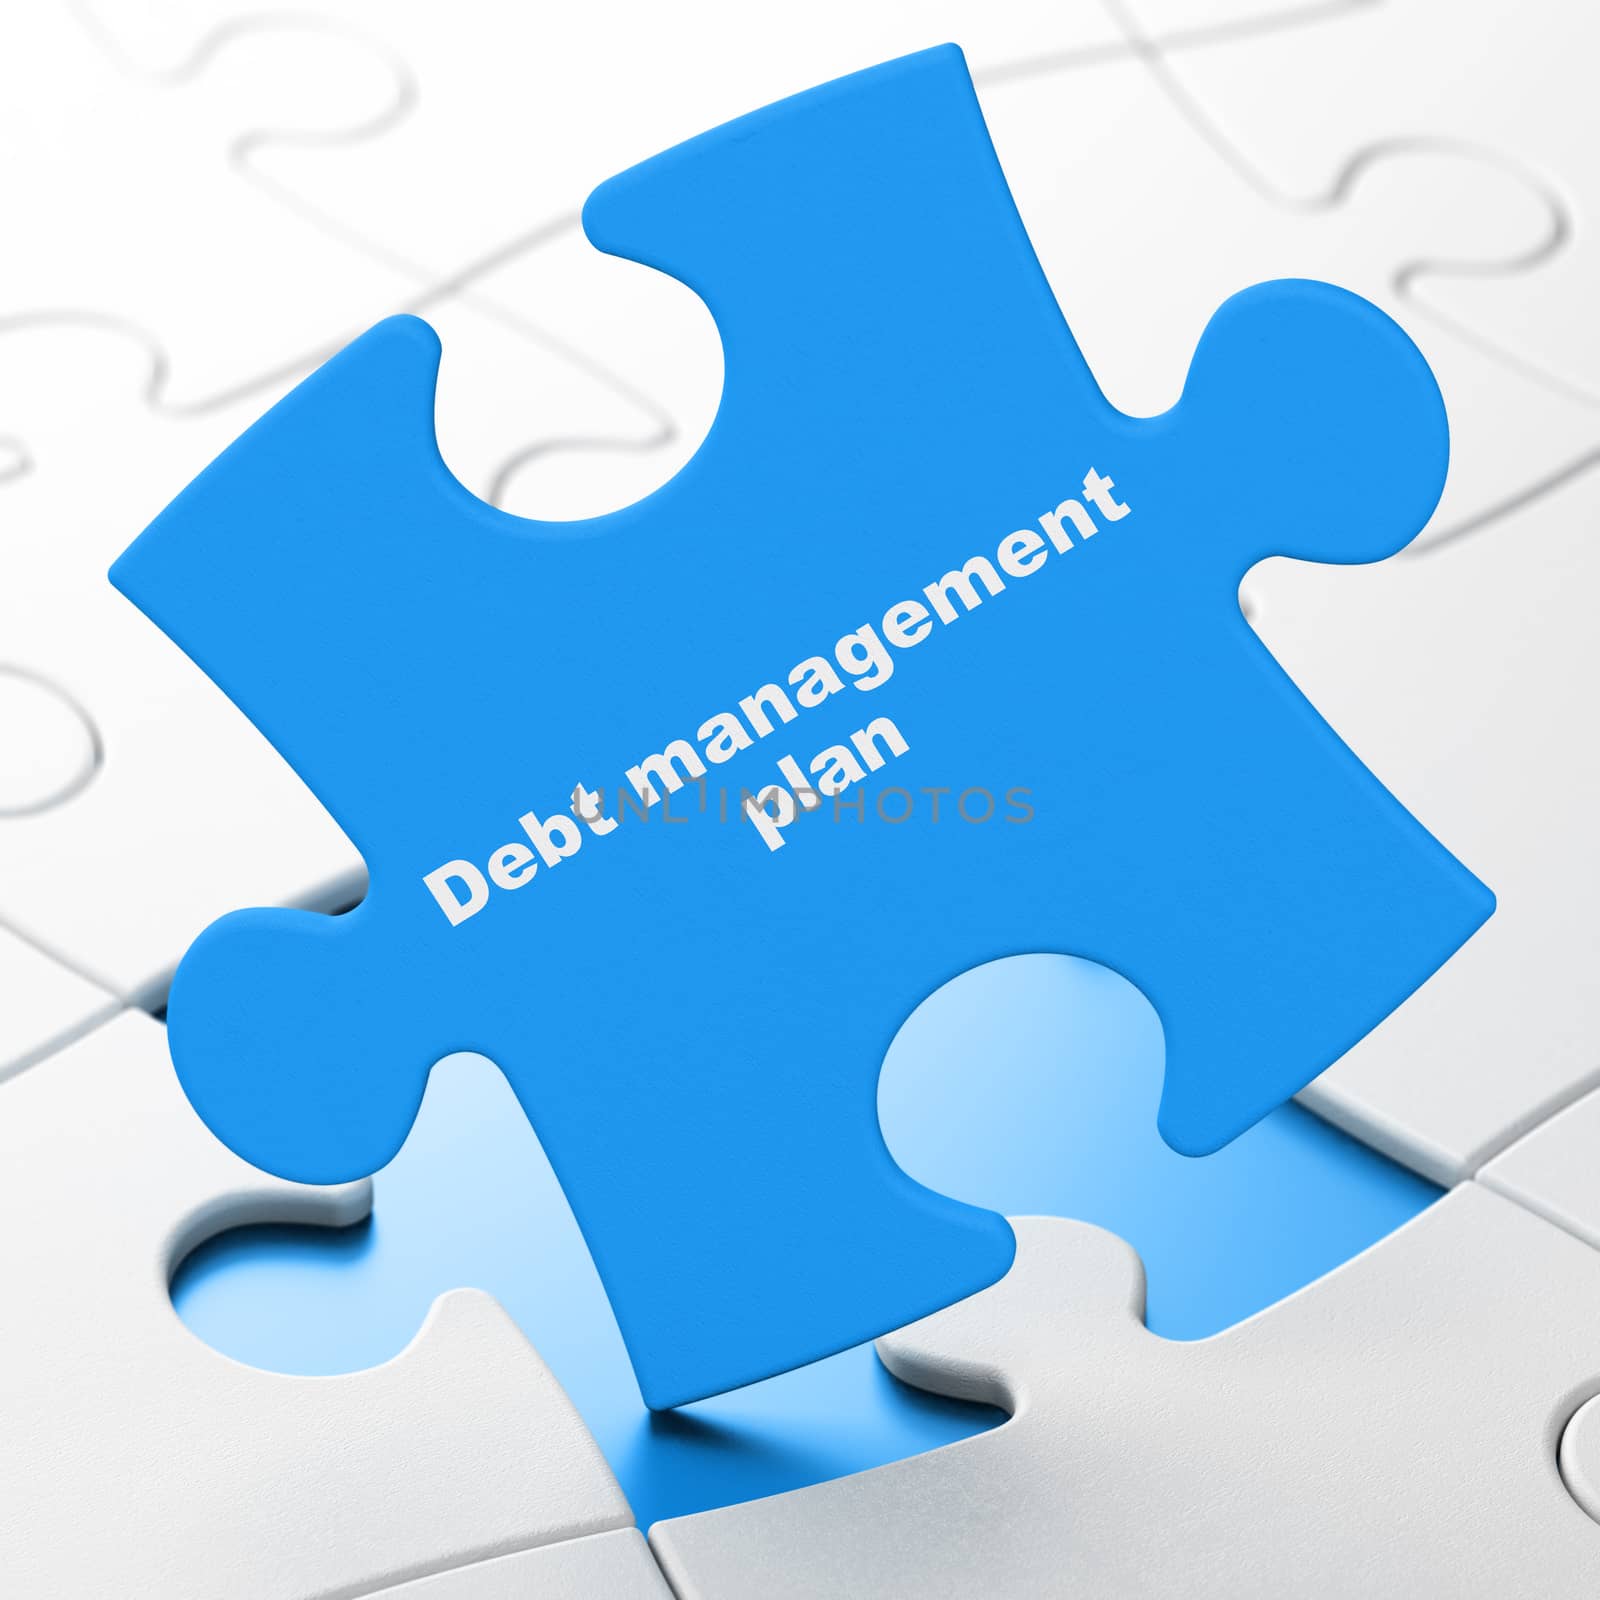 Business concept: Debt Management Plan on puzzle background by maxkabakov